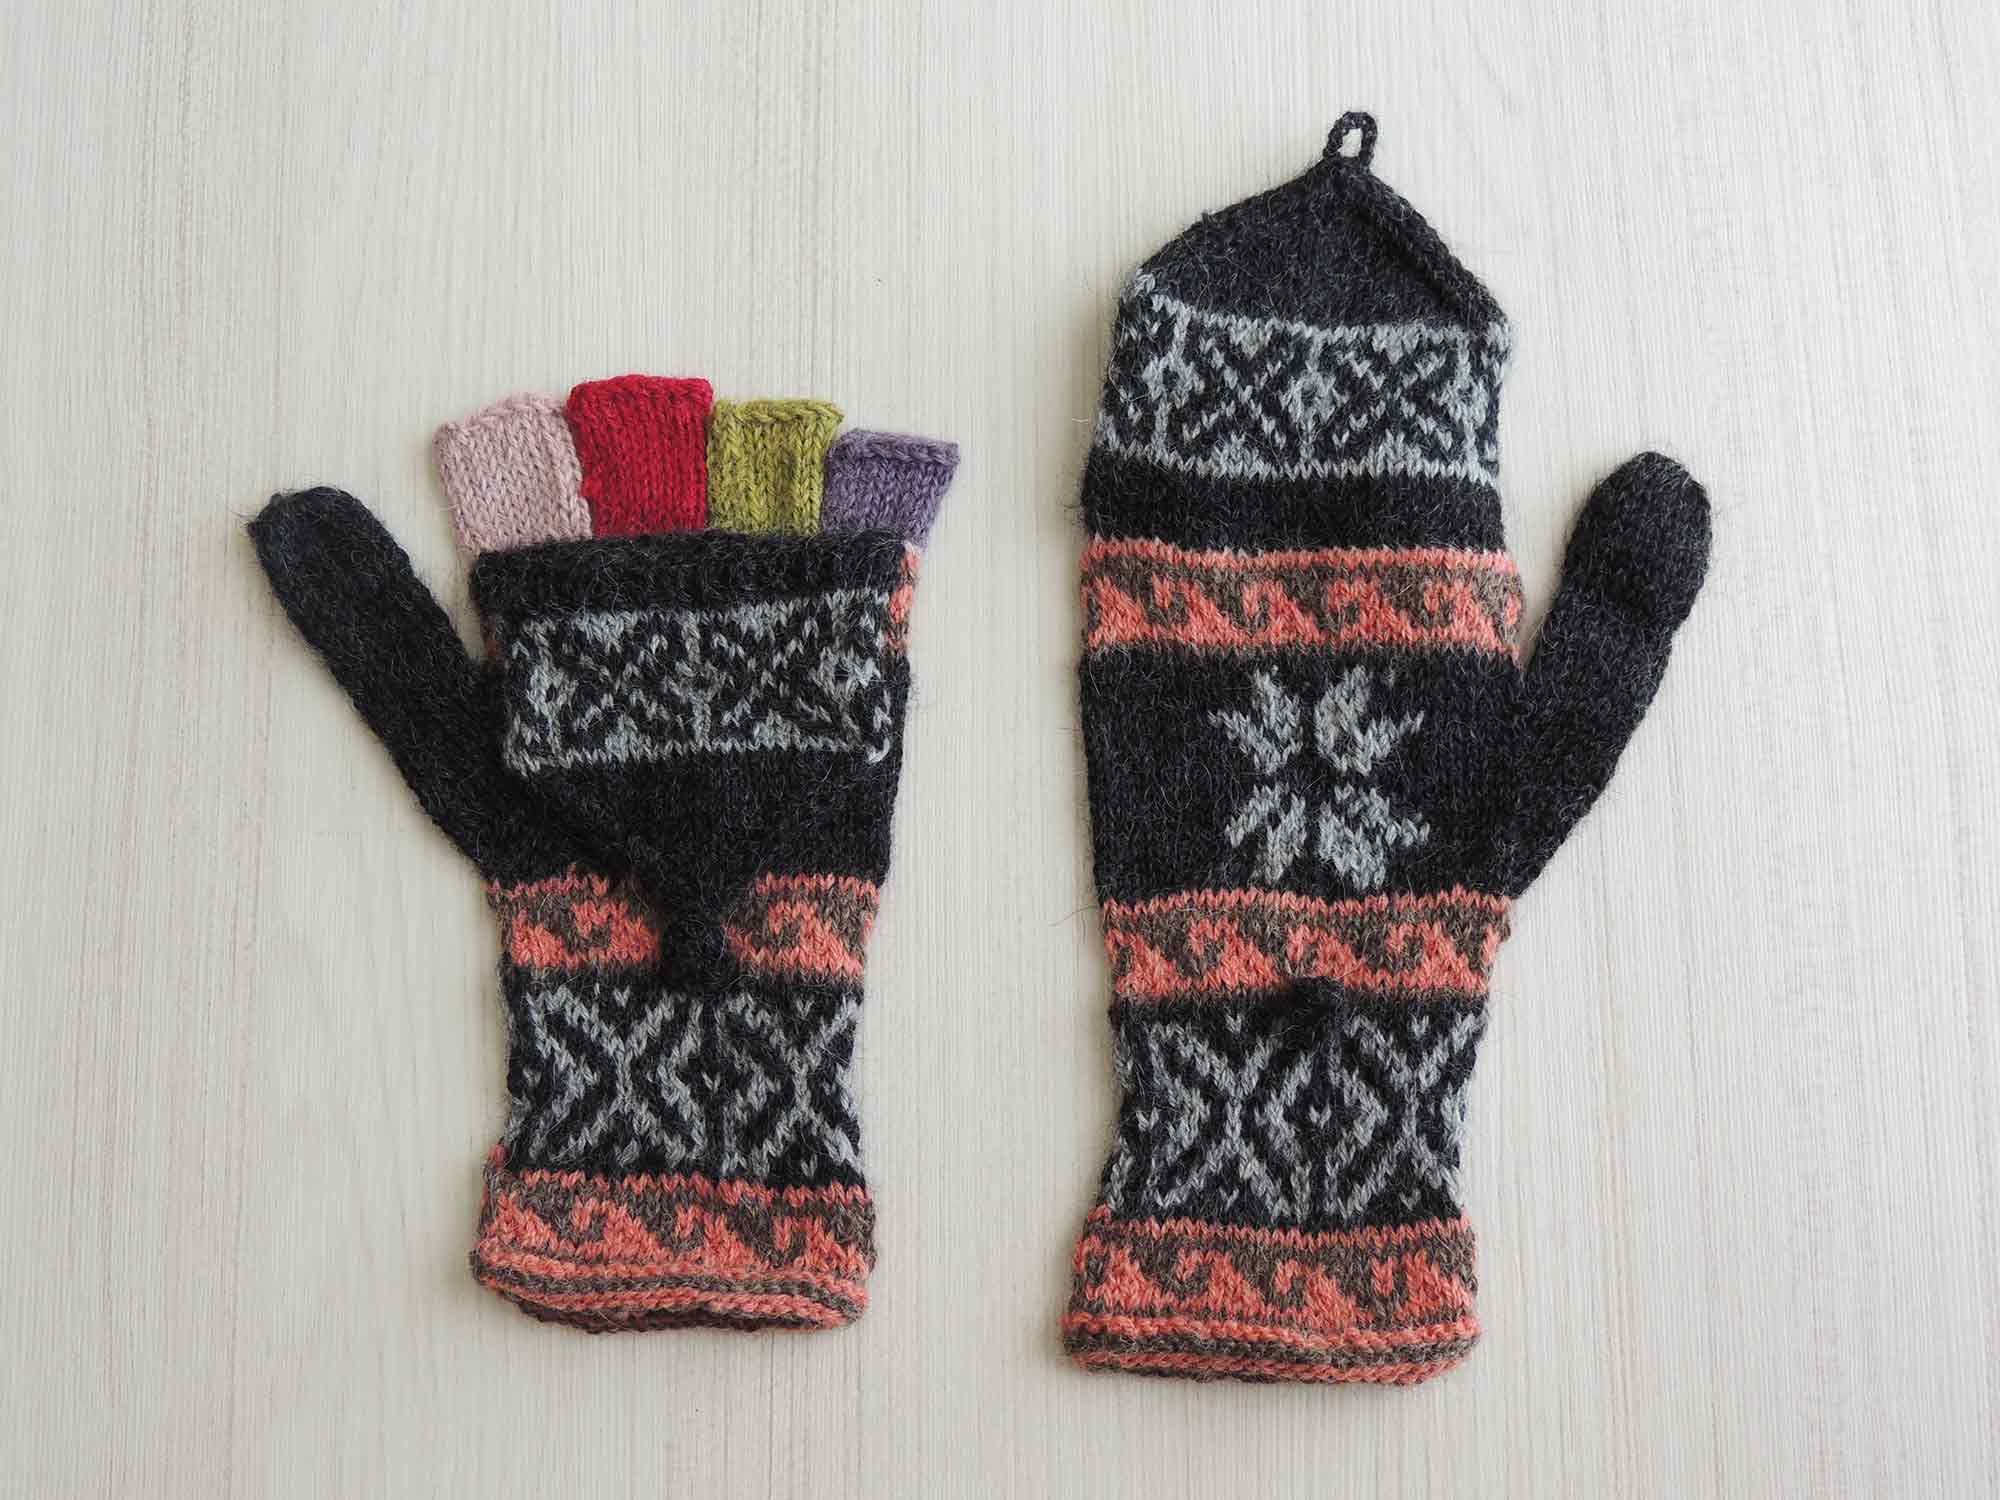 PopsFL knitwear producer wholesale Convertible fingerless mittens 100% alpaca hand knitted multi color natural dyes, fingerless gloves